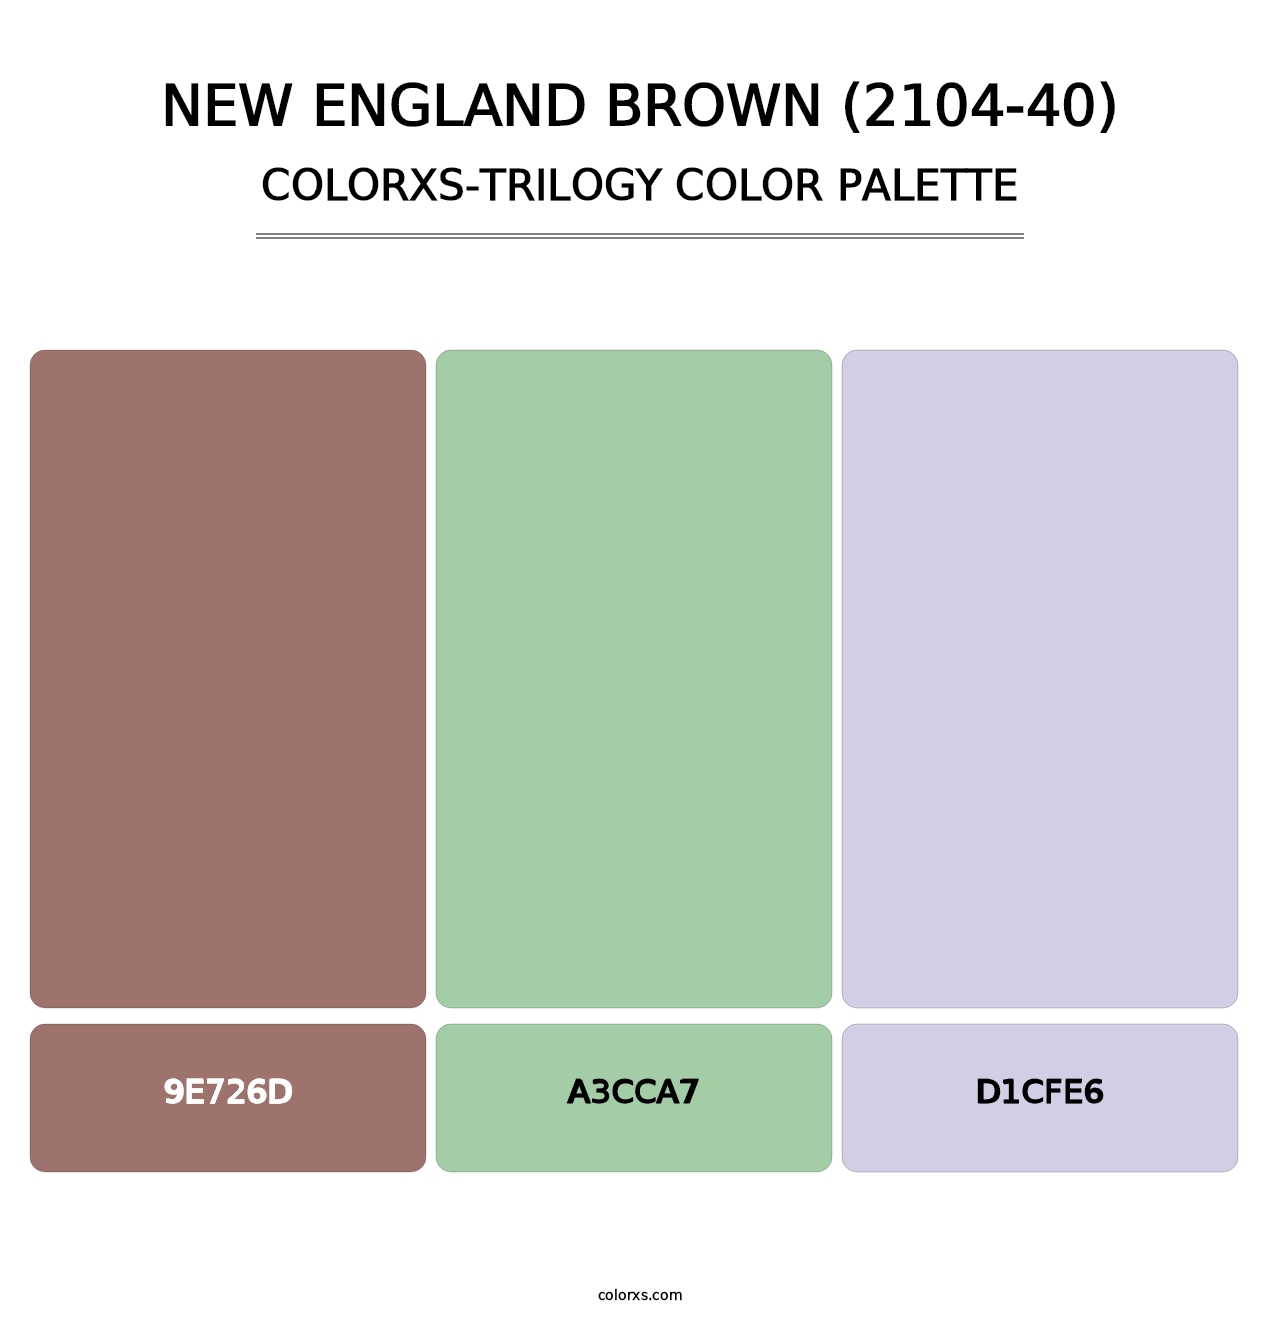 New England Brown (2104-40) - Colorxs Trilogy Palette